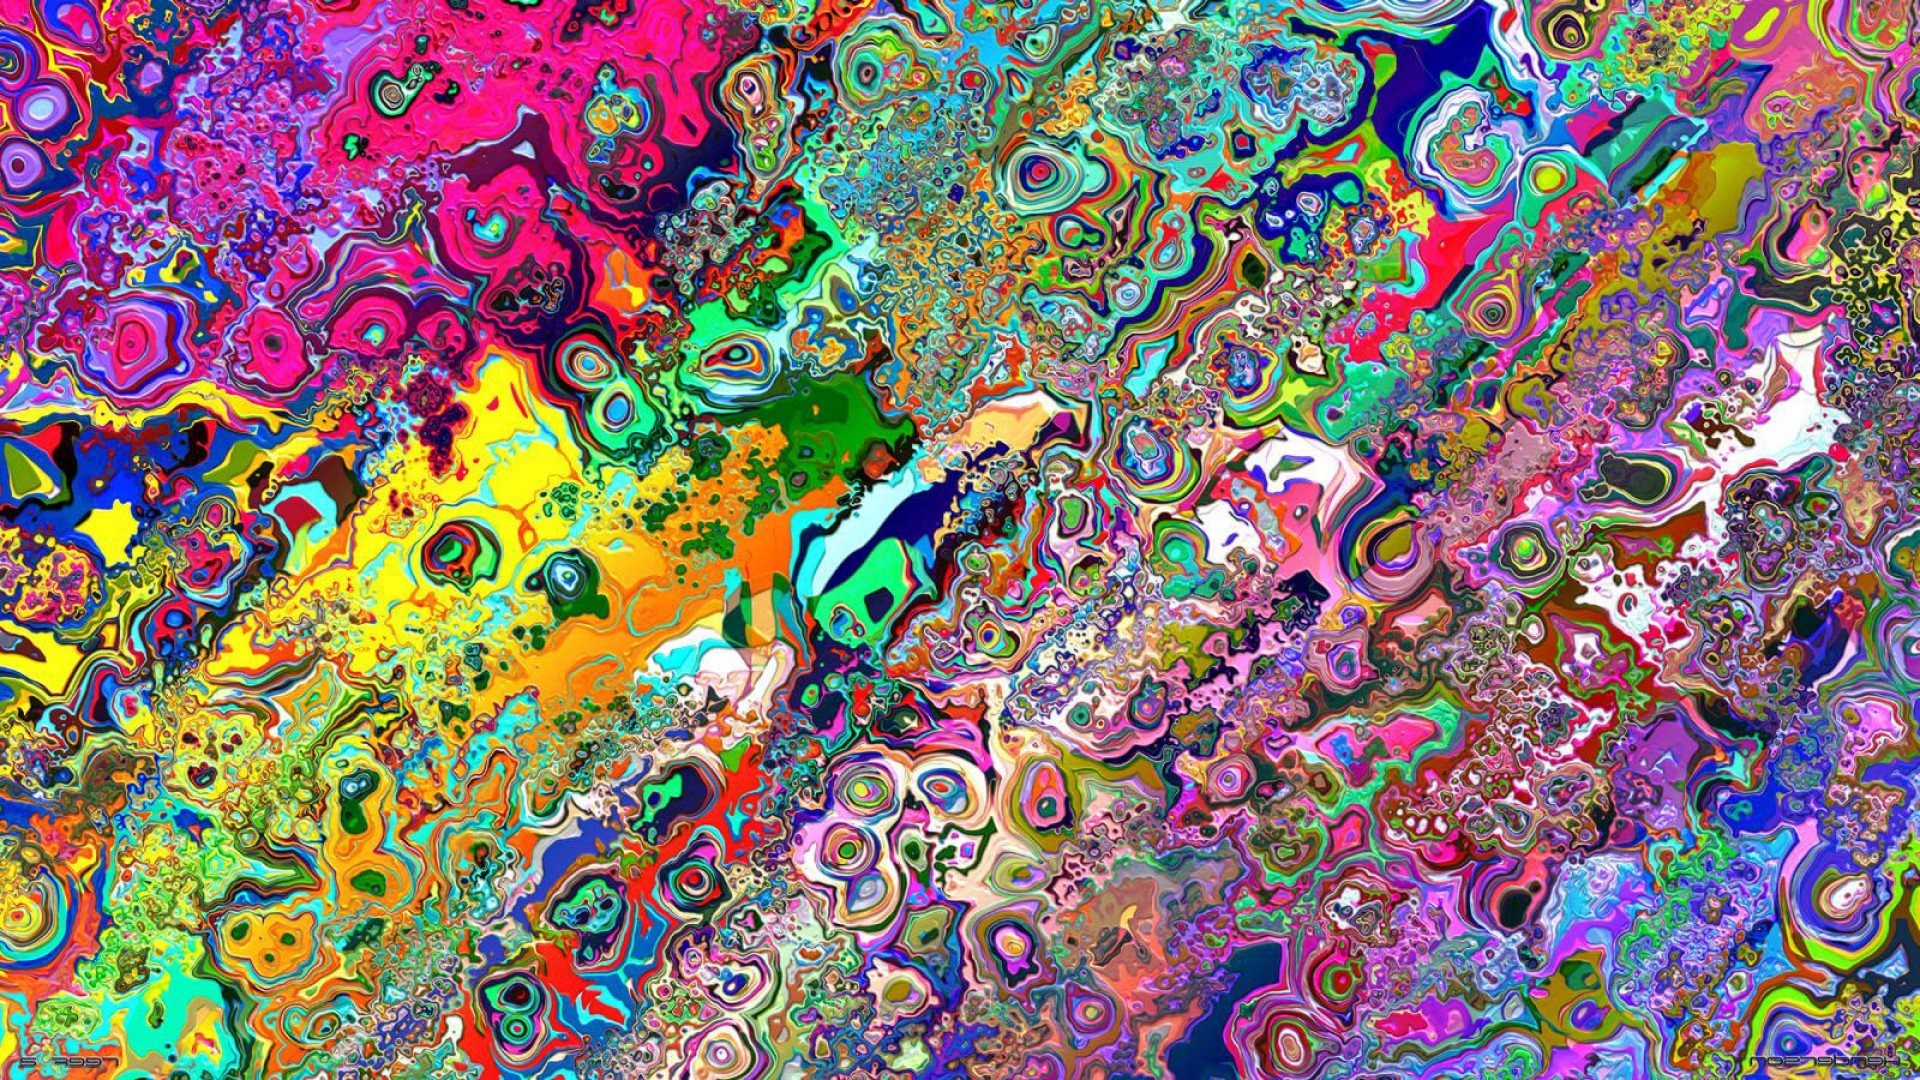 1920x1080 ... 538 Psychedelic HD Wallpapers | Backgrounds - Wallpaper Abyss Trippy ...